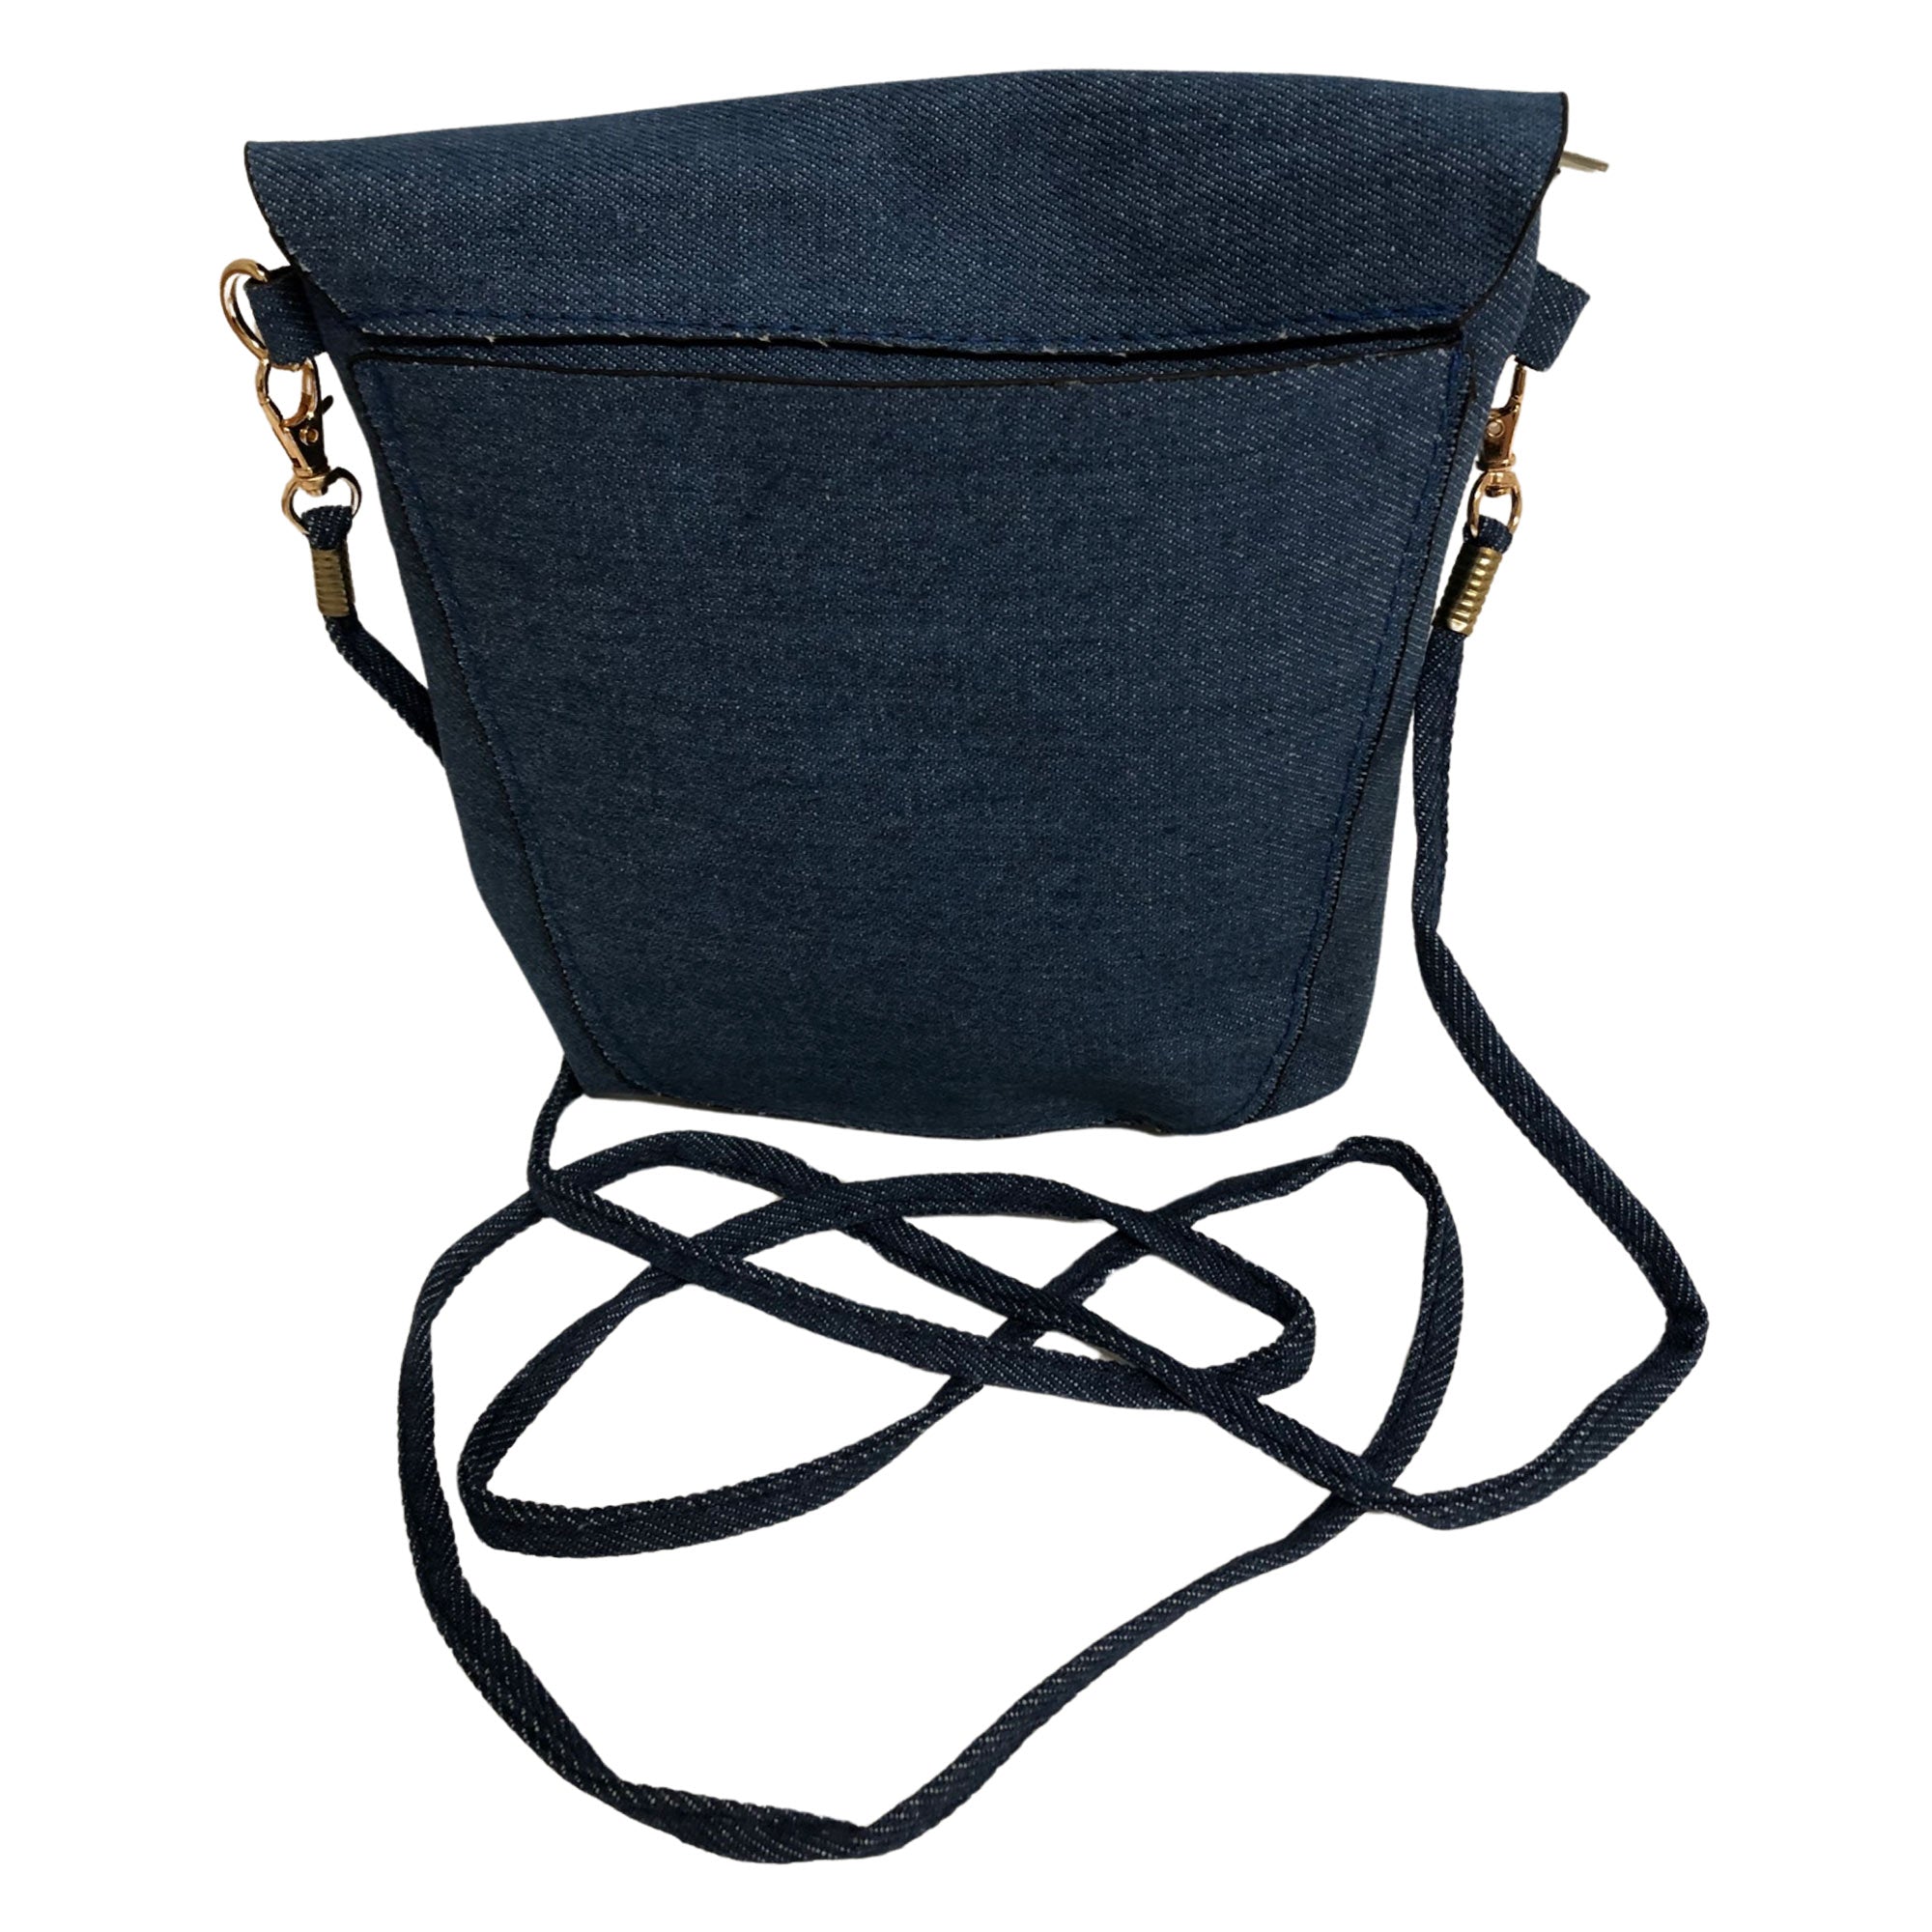 CLEARANCE CROSSBODY IN DENIM (CASE OF 48 - $1.50 / PIECE)  Wholesale Crossbody in Jeans Material SKU: M83703-JEANS-48